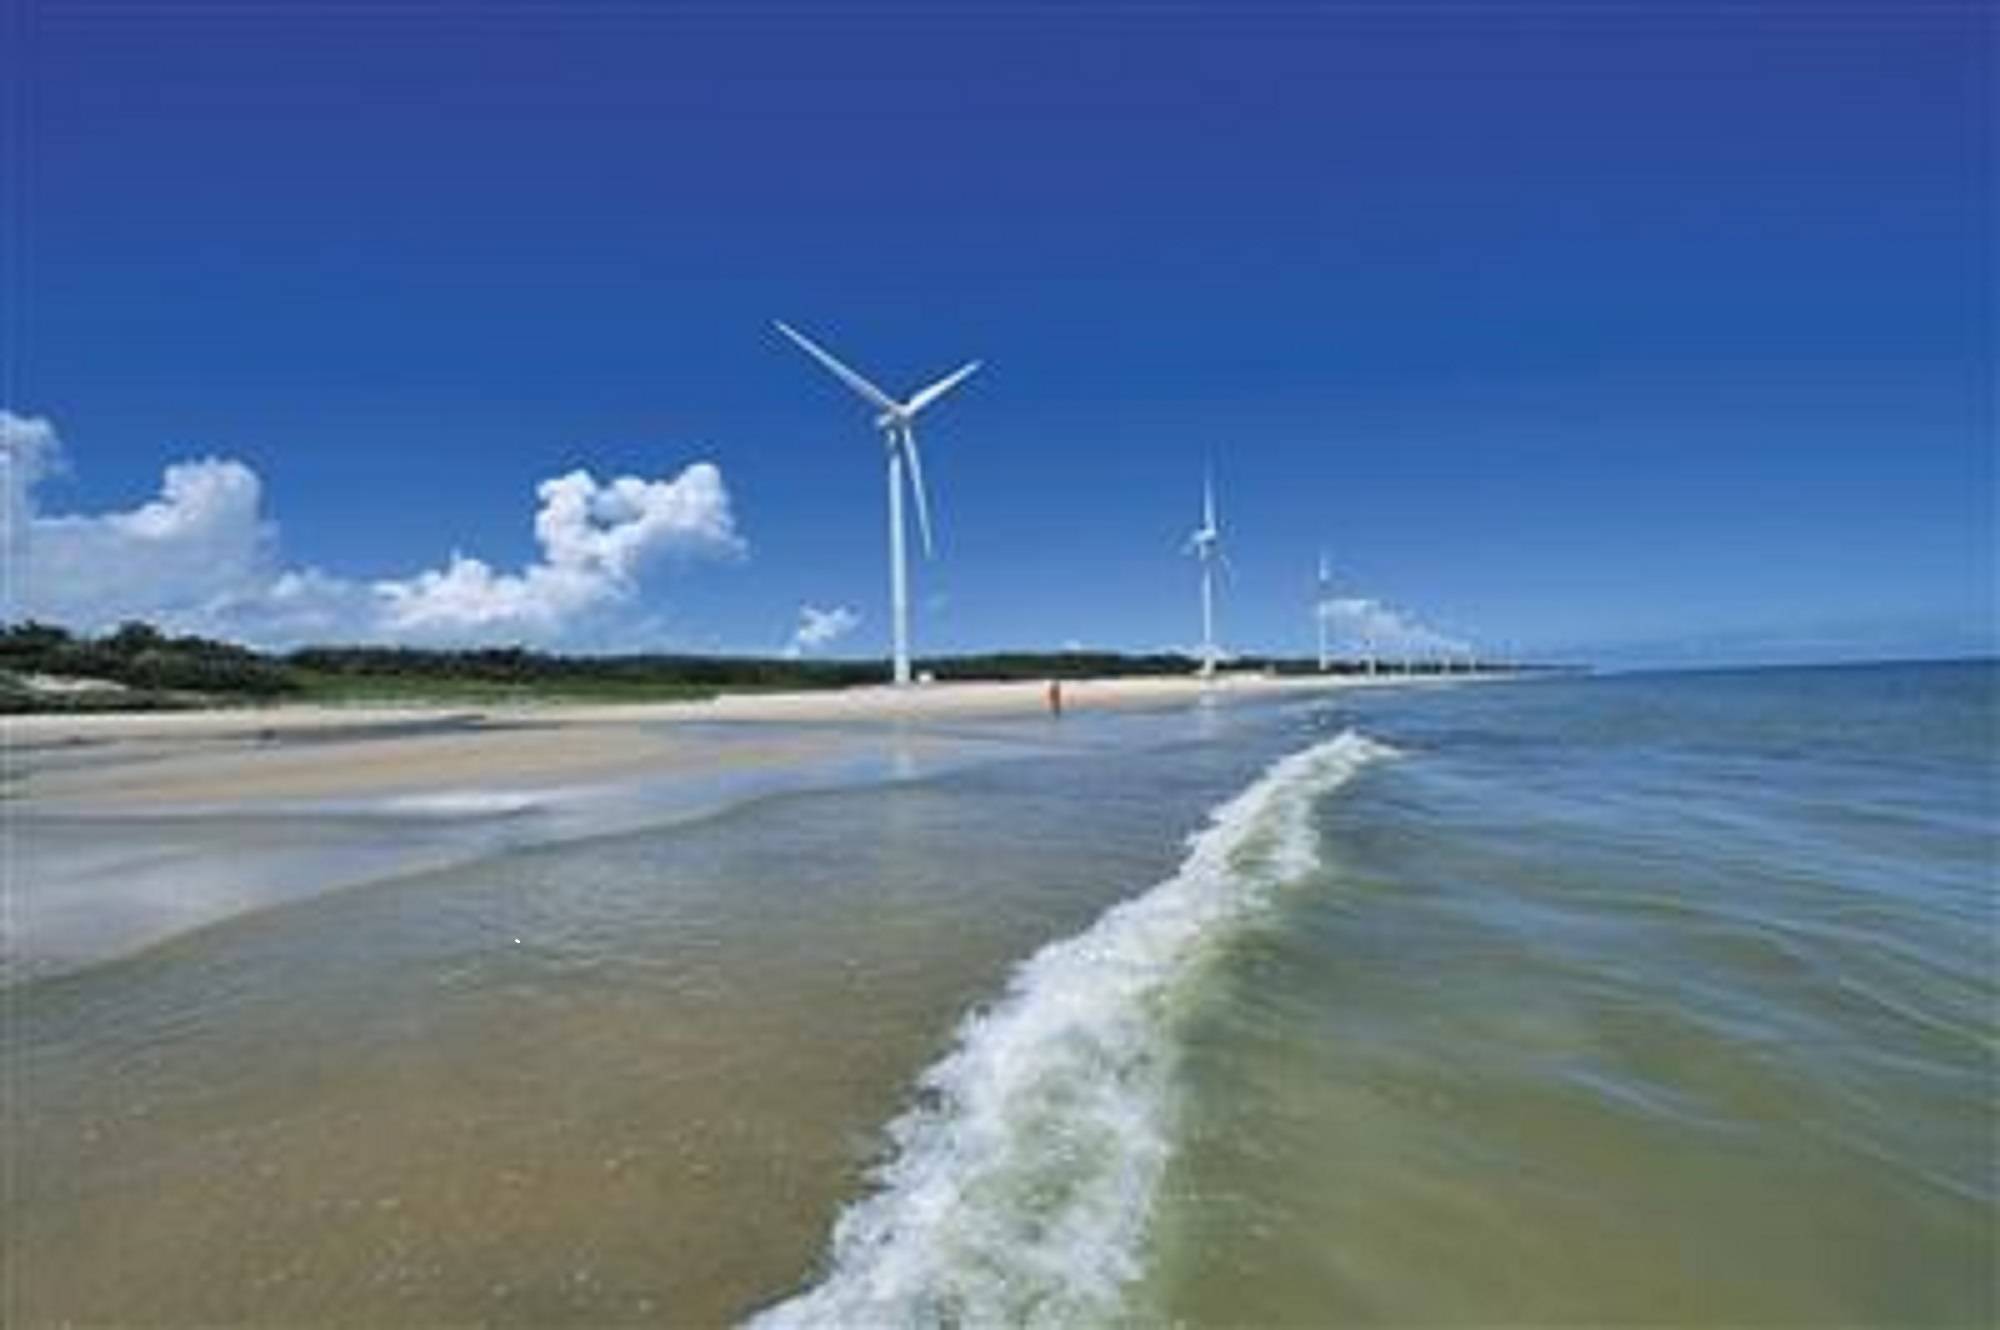 ABB to provide power products for China's large offshore wind farm